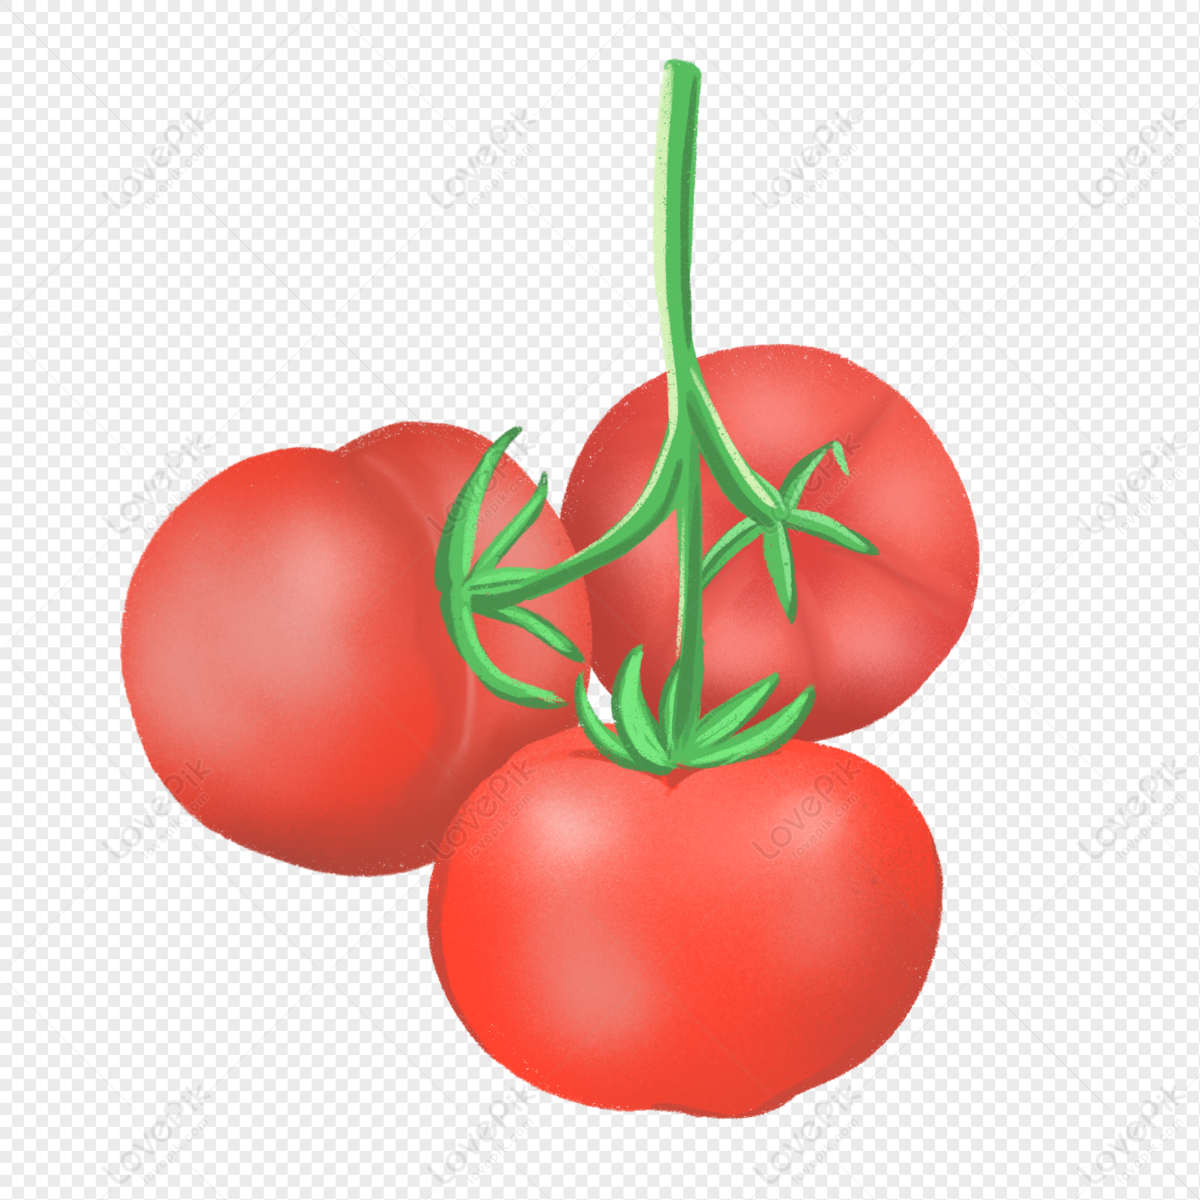 Tomato Drawing Kamatis - Vegetable Tomato In Clip Art Transparent ...